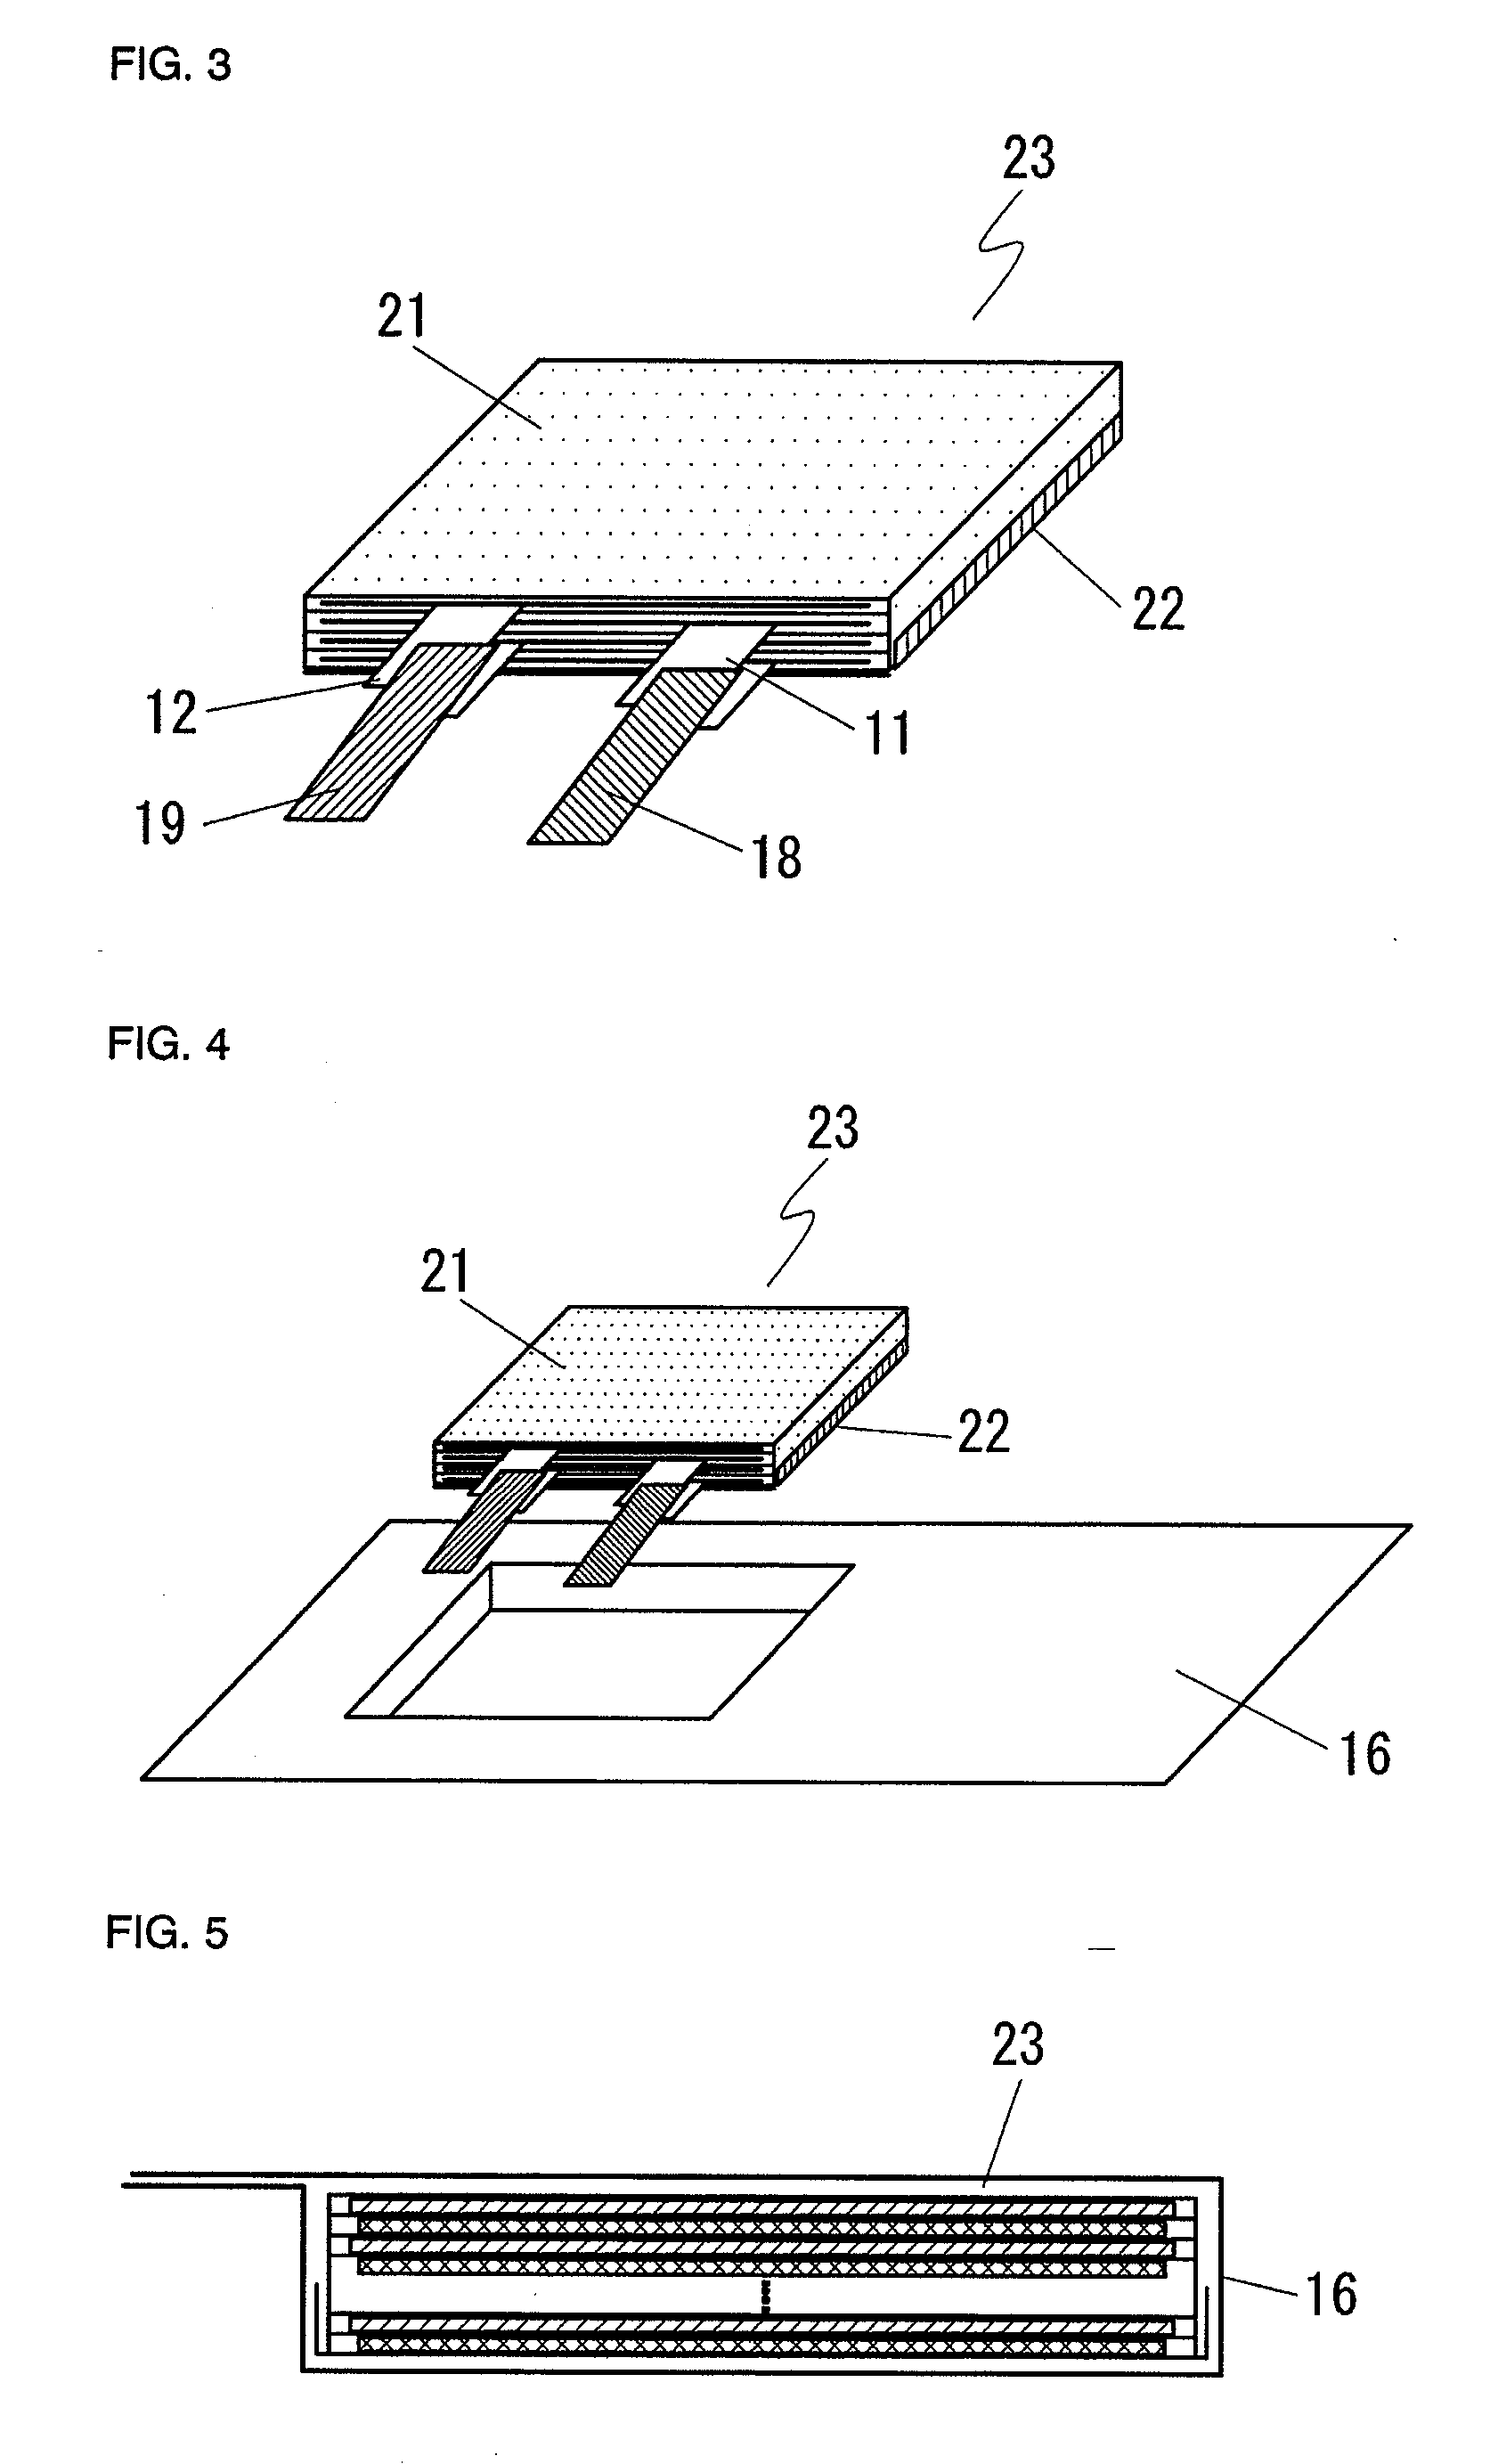 Stack-type lithium-ion polymer battery